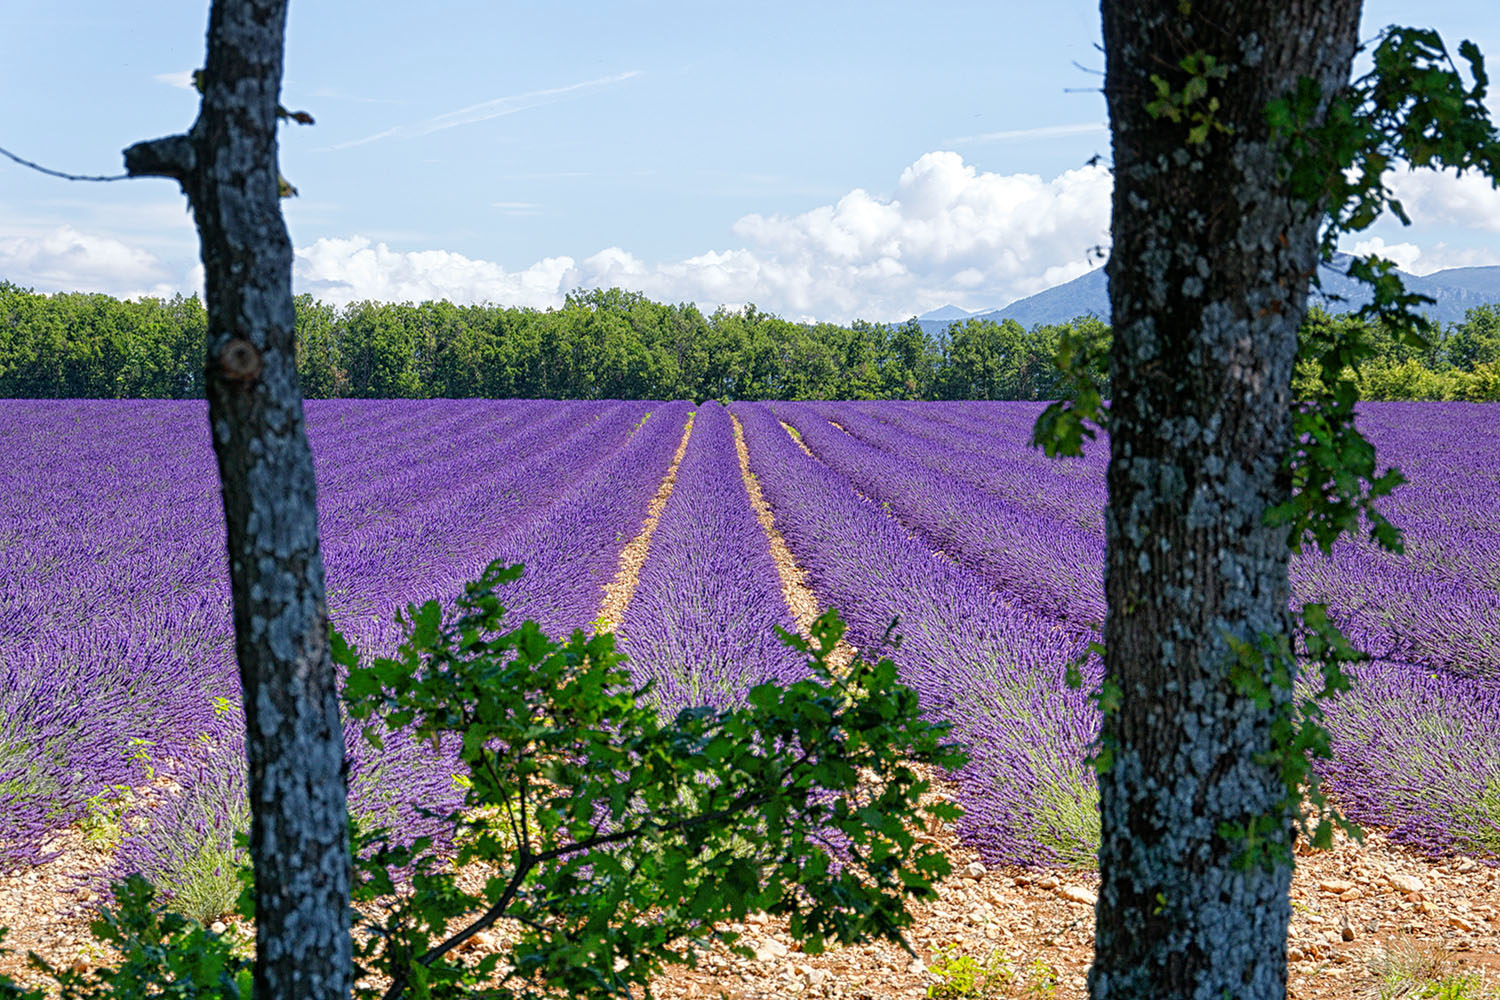 Lavender is predominantly used to make oils for the perfume industry.